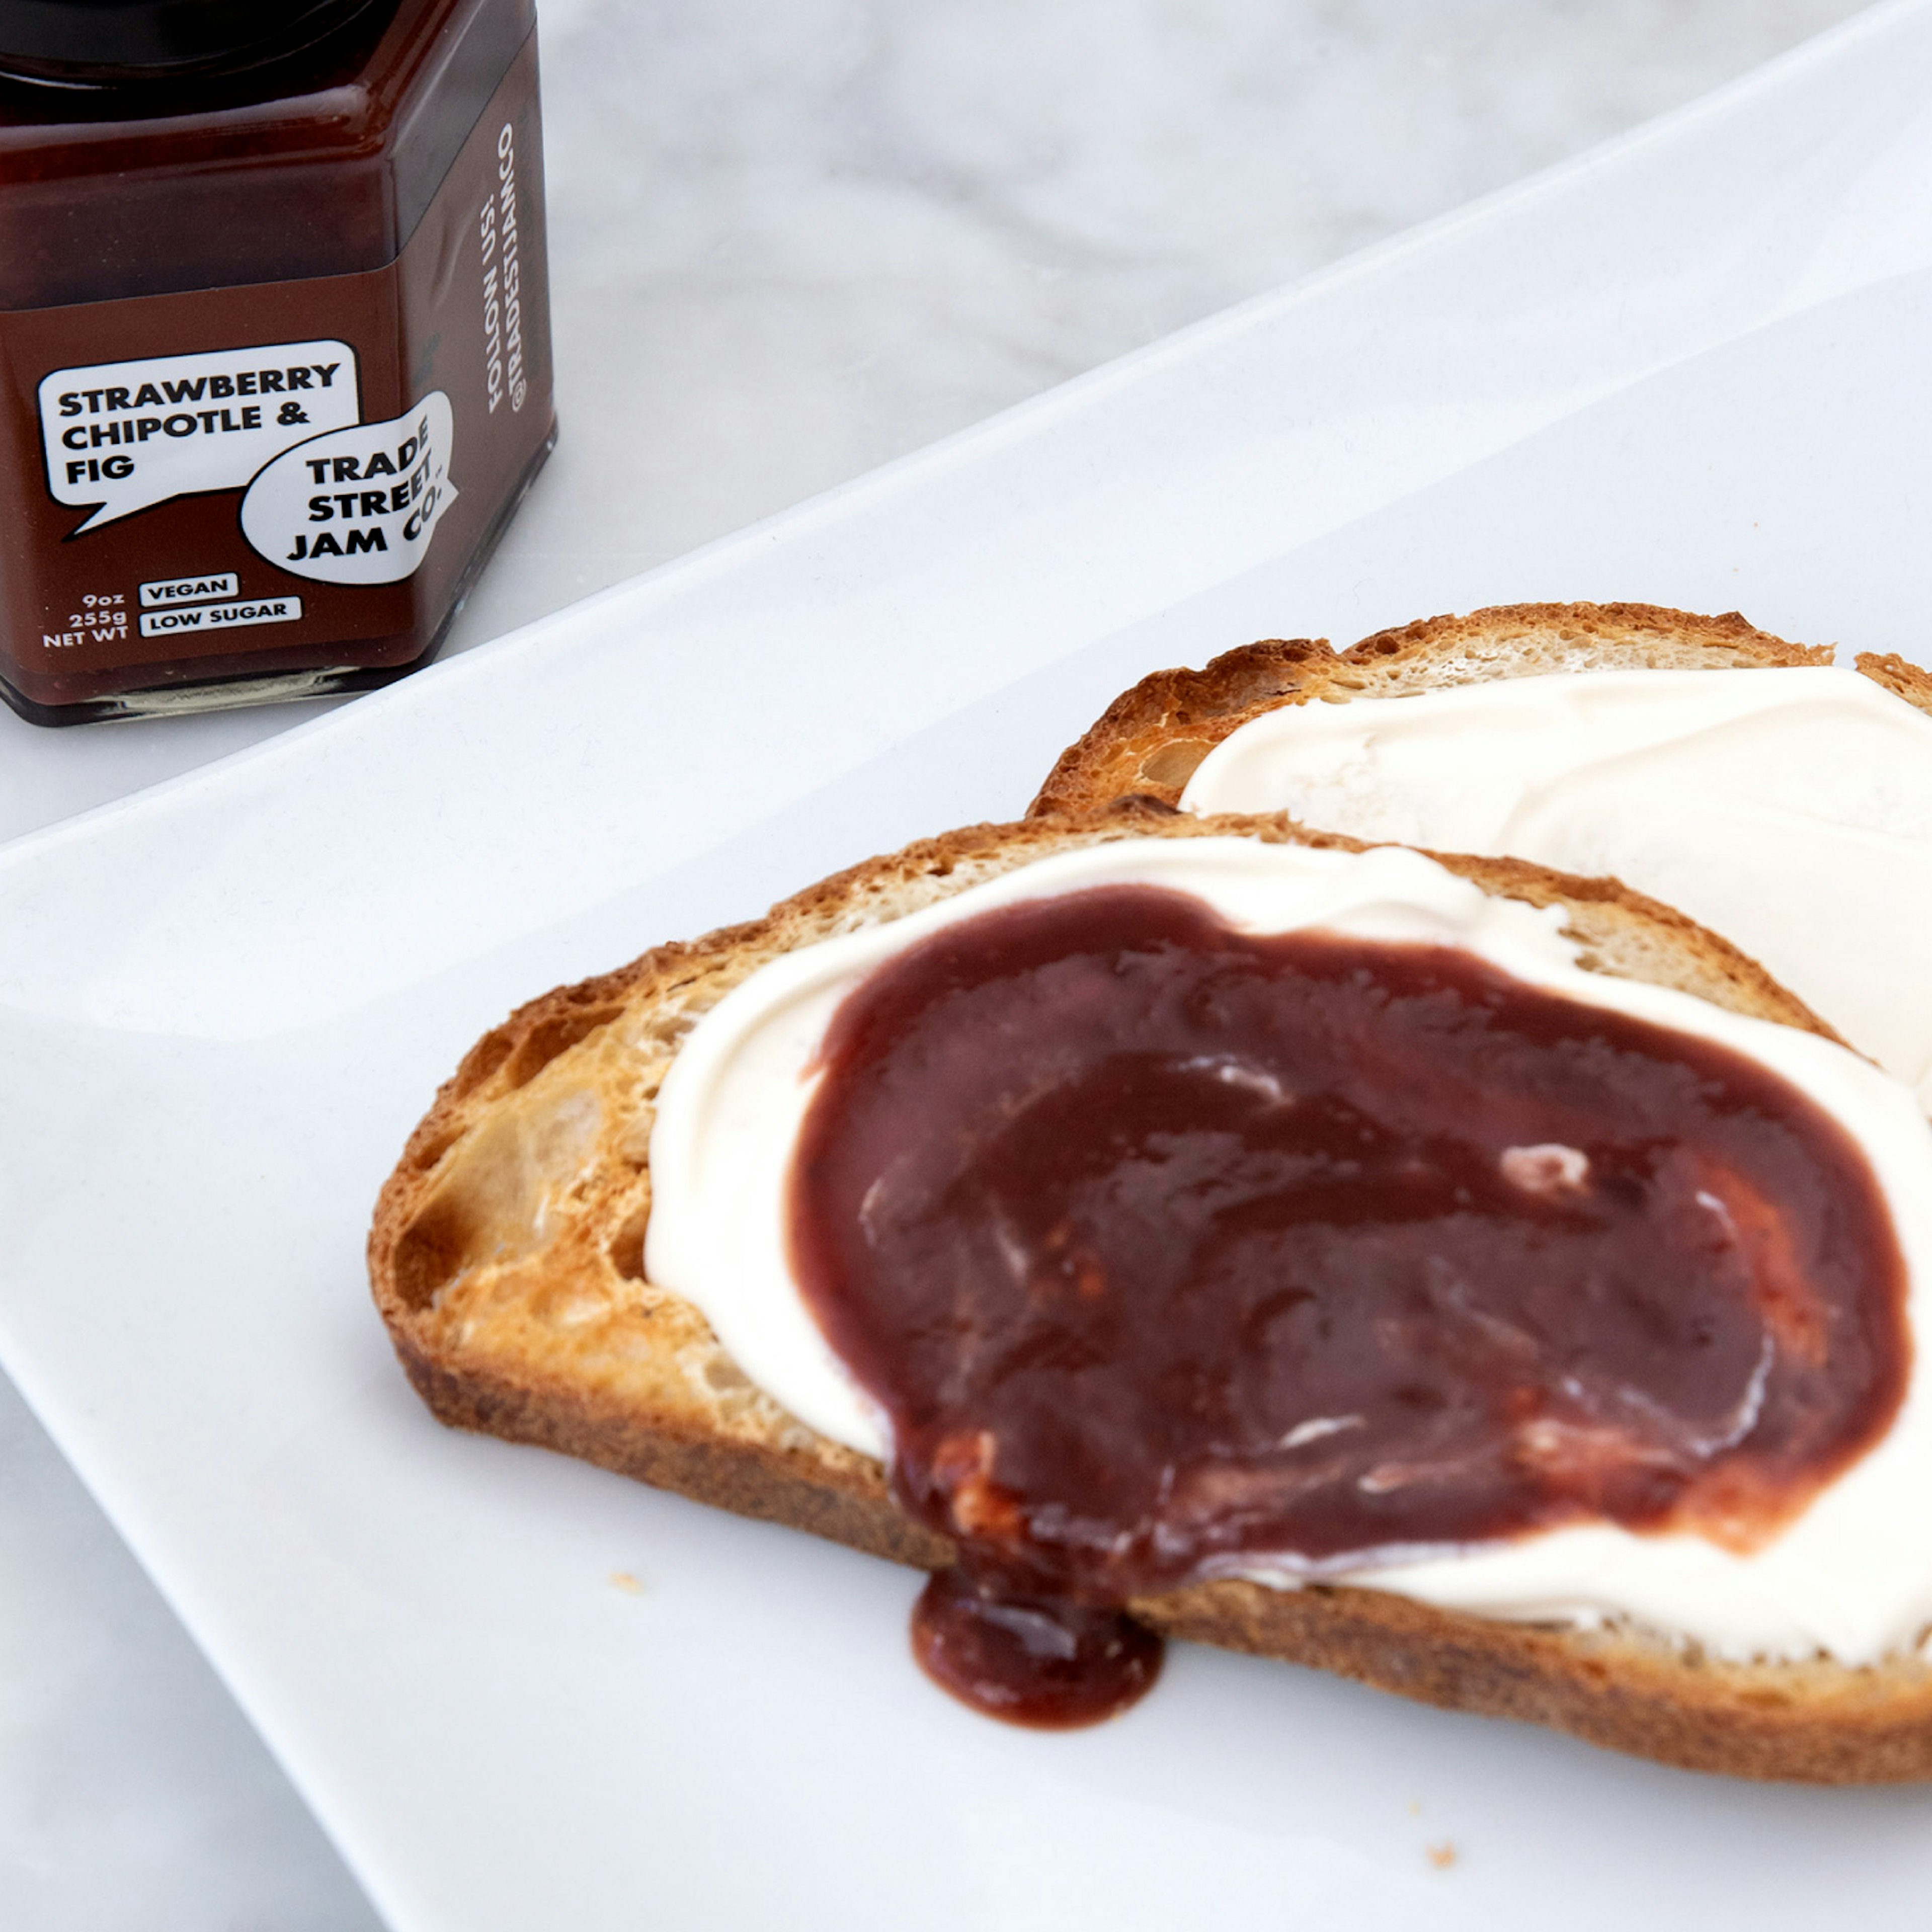 trade street jam co strawberry fig chipotle jam specialty foods